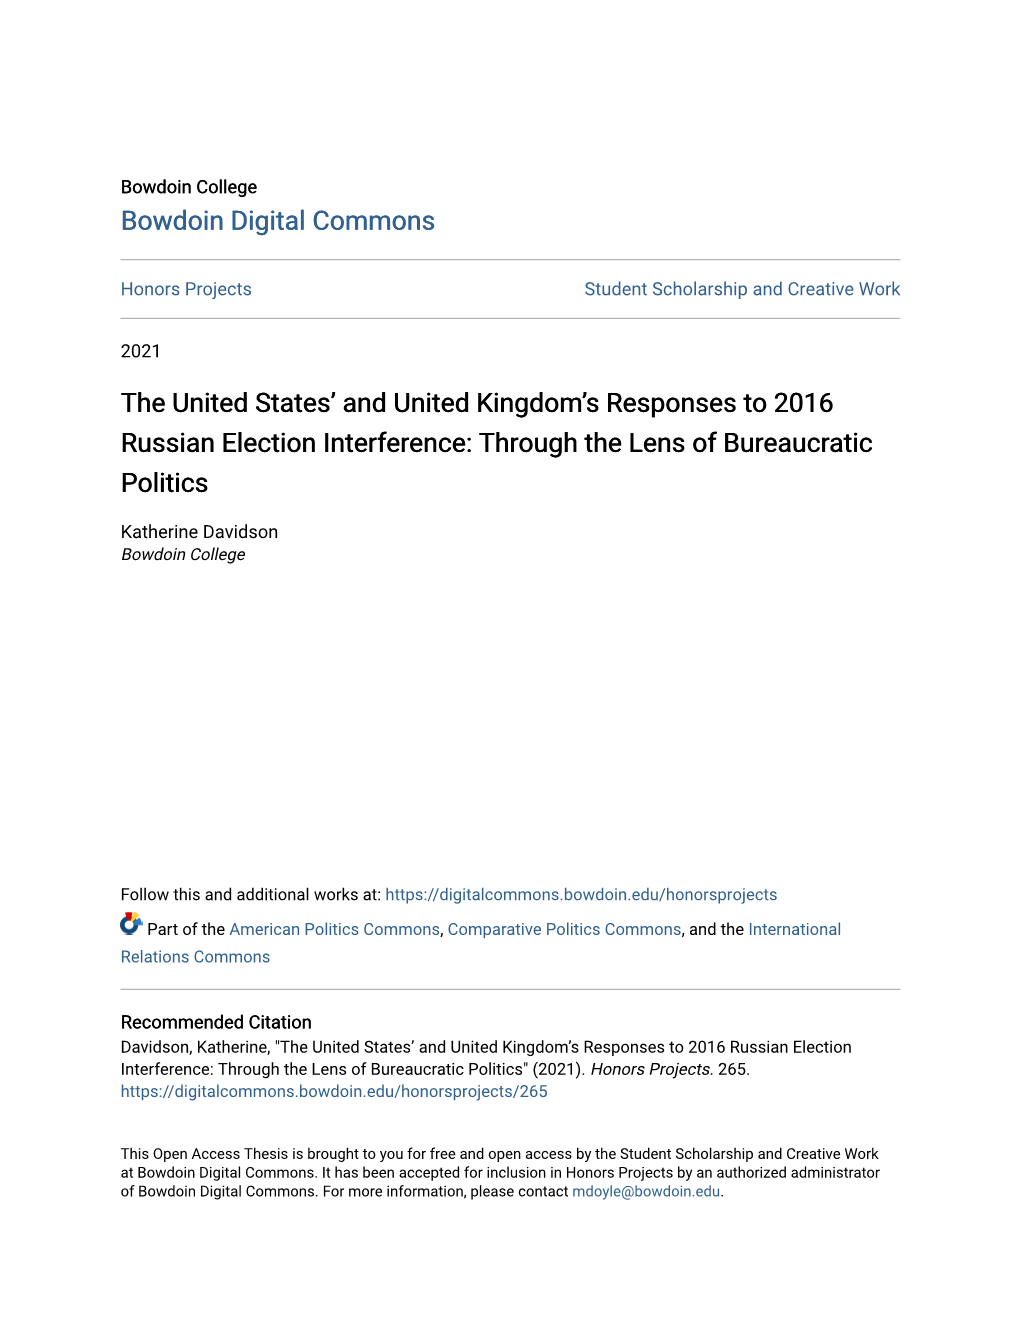 The United States' and United Kingdom's Responses to 2016